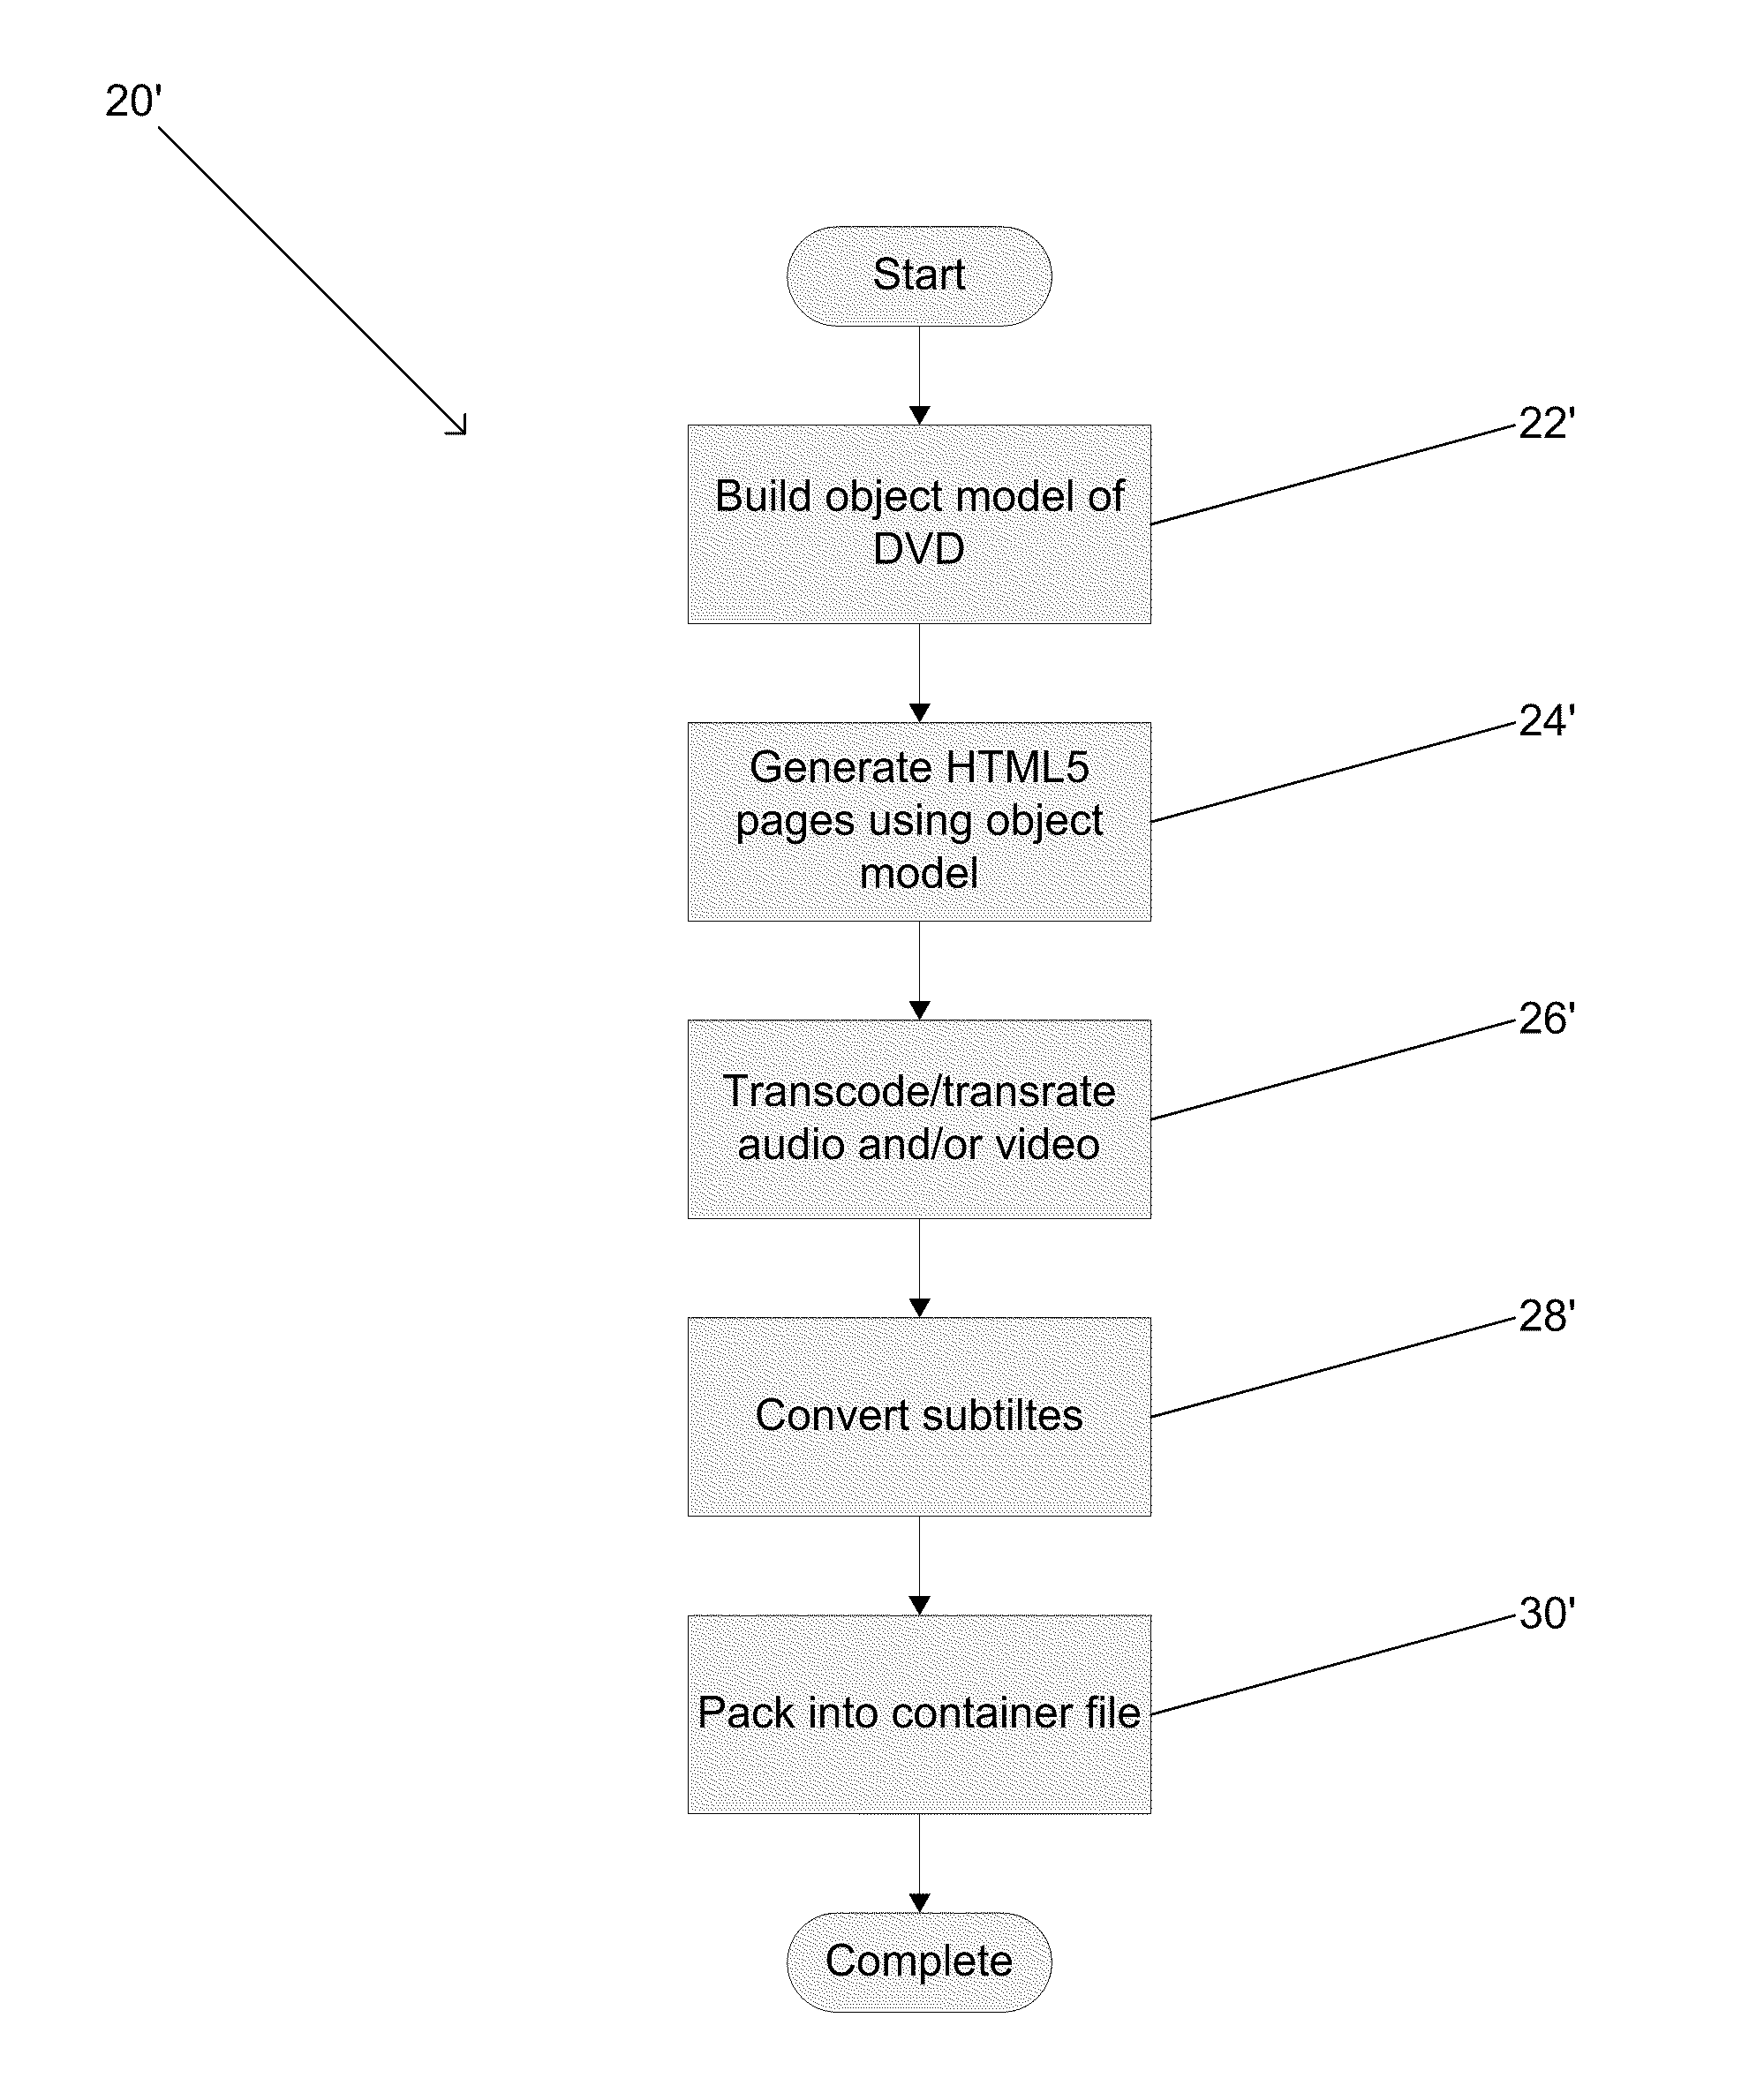 Systems and methods for electronic sell-through of interactive multimedia content authored for distribution via physical media